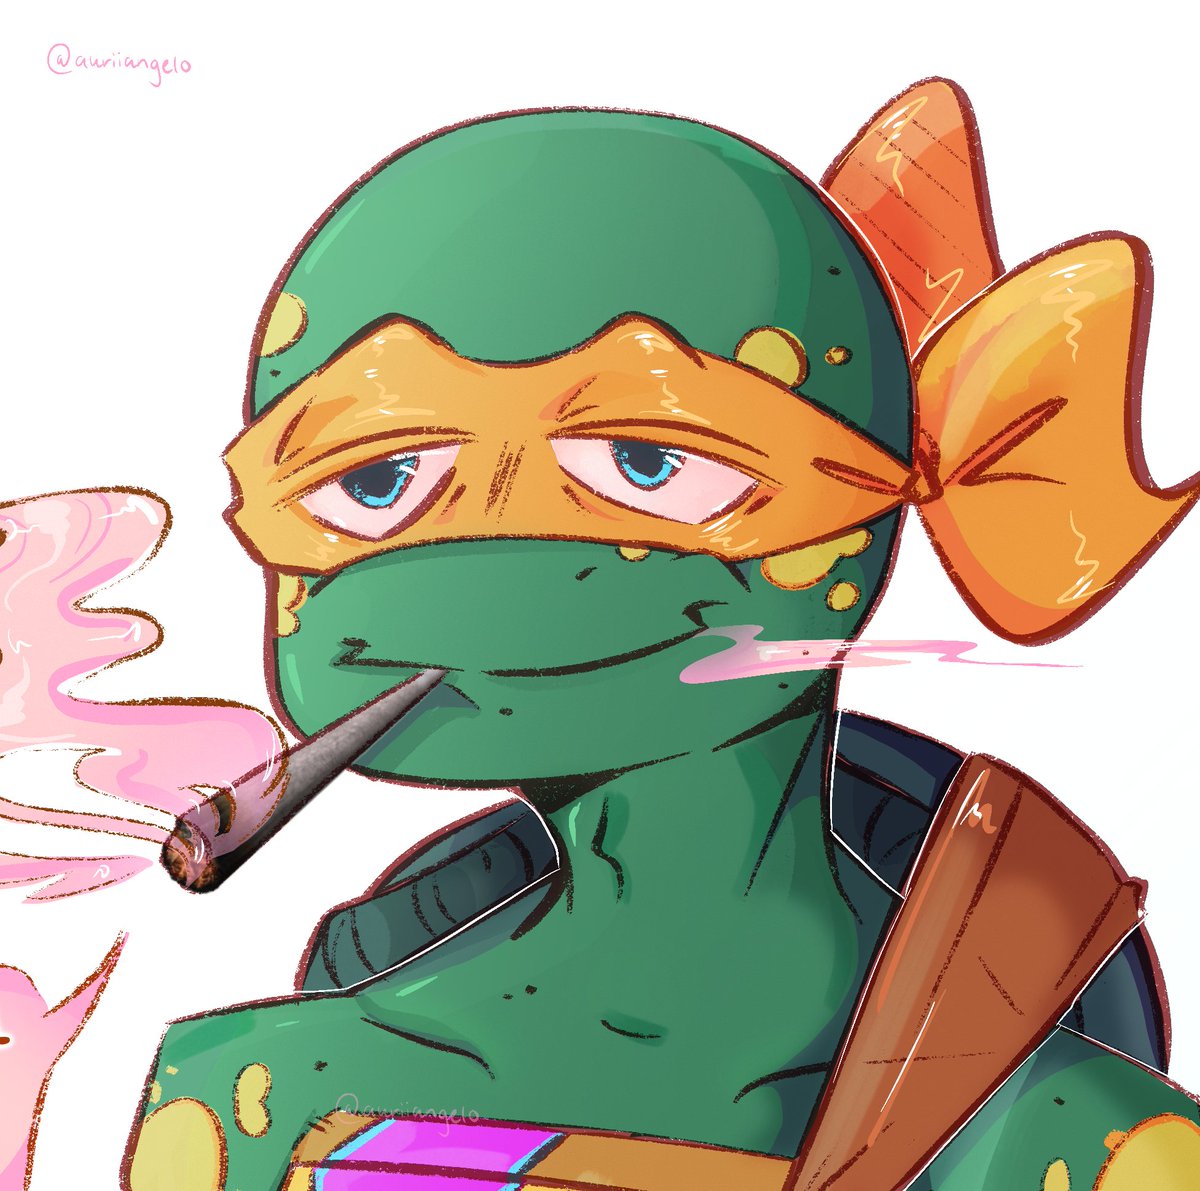 [ 4/20 April 20th FANART w/ Mikey ] 

Scheduled post 📆
anyways, be responsible; I did this with a few moots

[ #rottmnt #rottmntmikey #TMNT #rottmntfanart #UnpauseROTTMNT ]